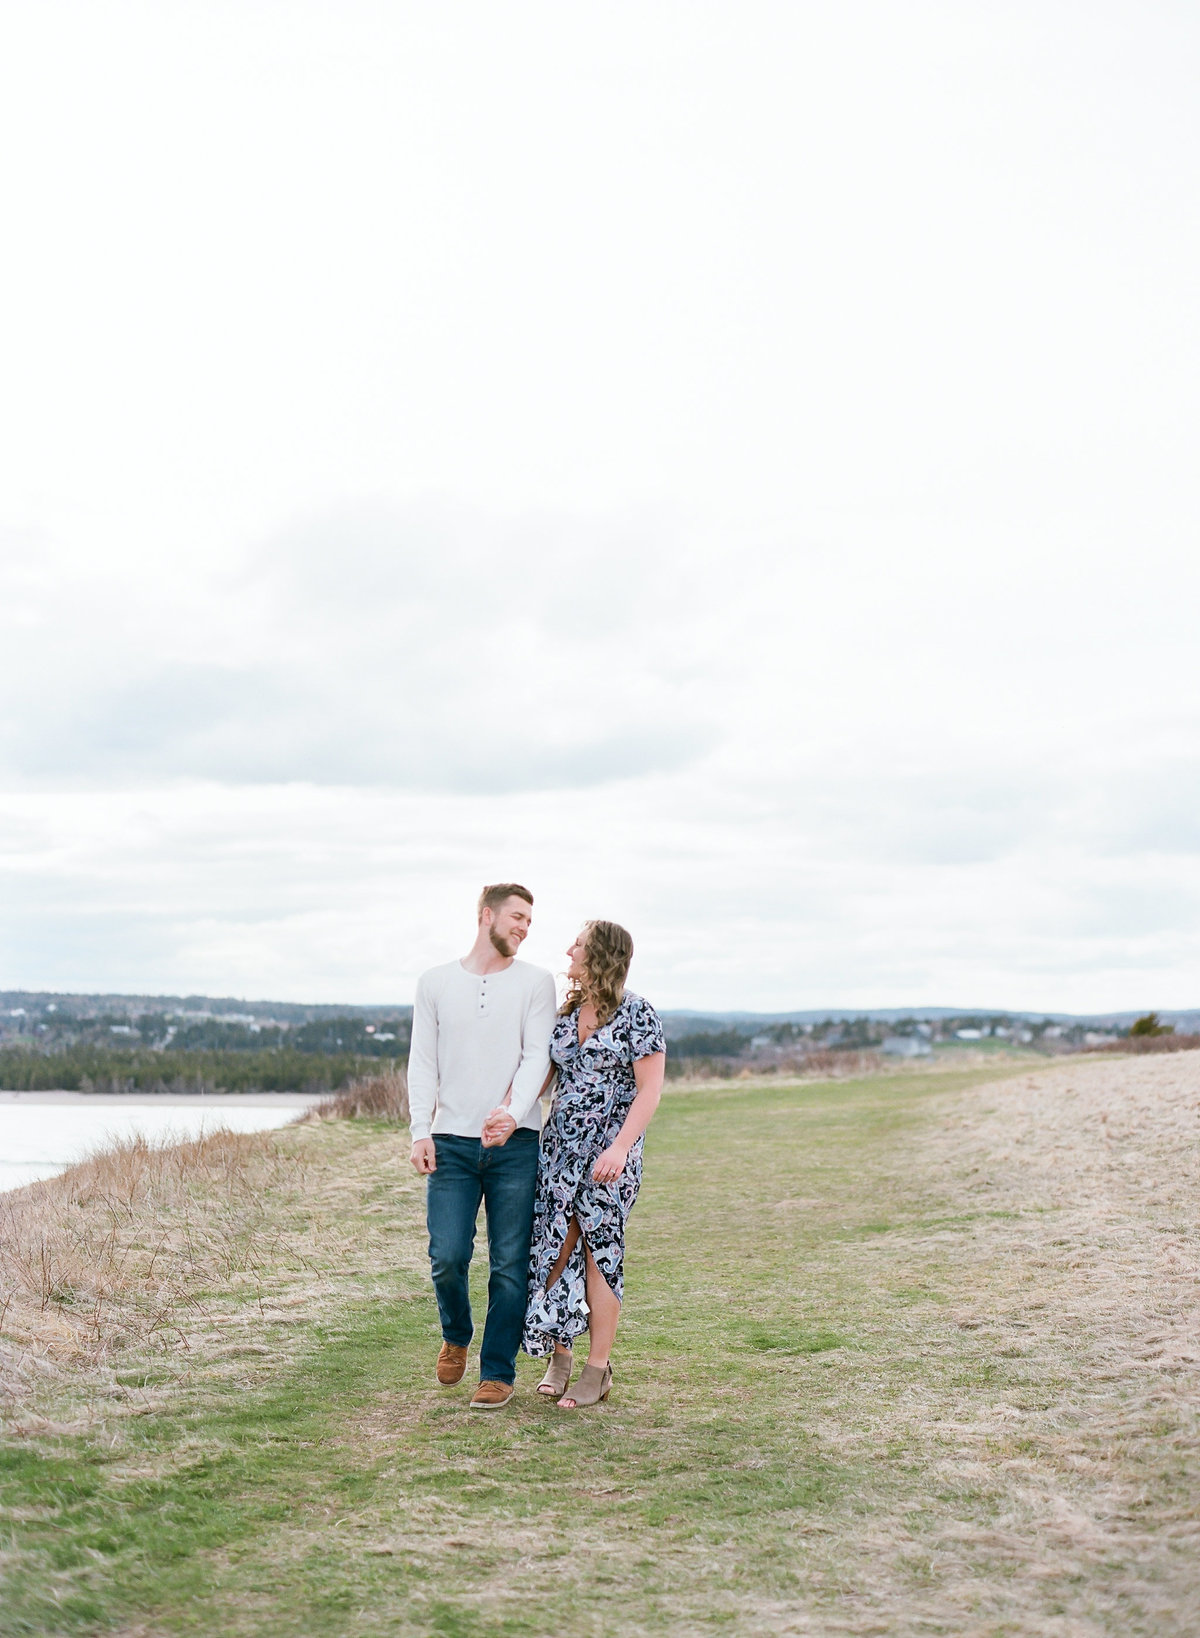 Jacqueline Anne Photography - Akayla and Andrew - Lawrencetown Beach-52